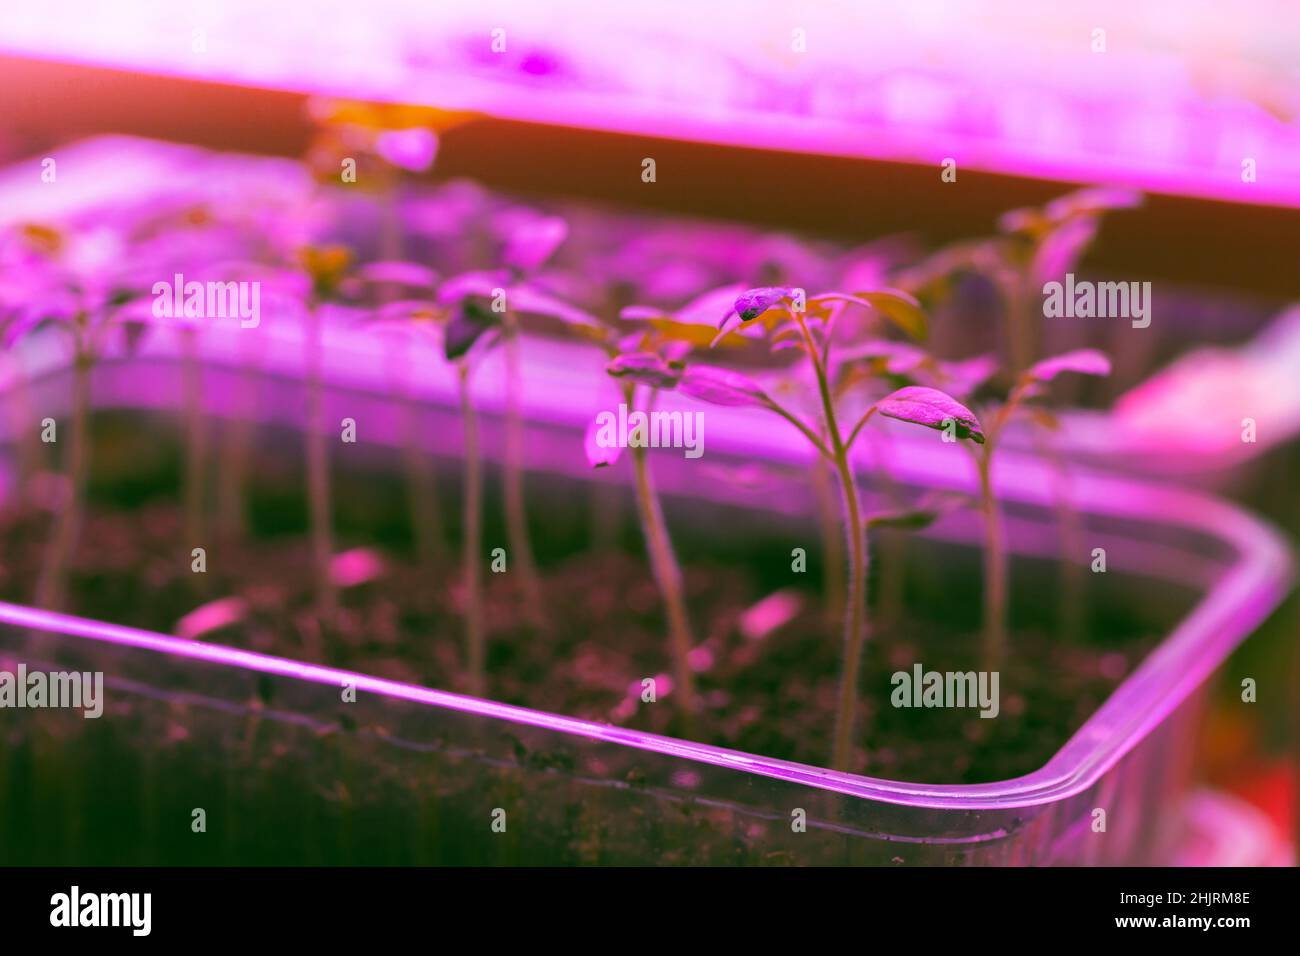 Small plant seedlings grow in plastic box under full spectrum phyto lamp. Indoor farming photo with soft selective focus Stock Photo